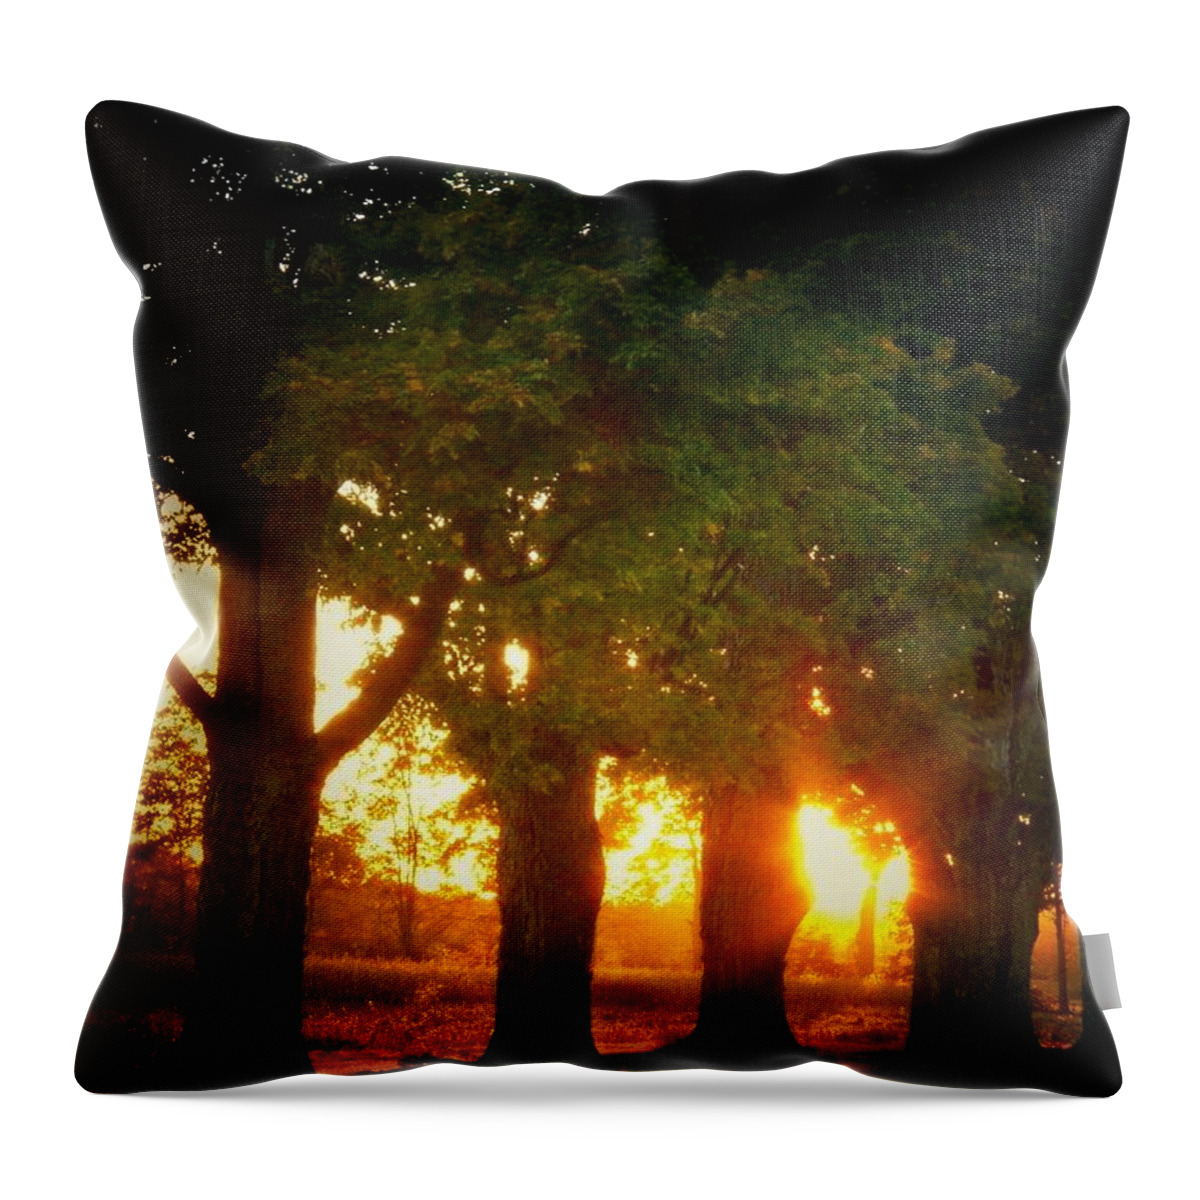 Trees Throw Pillow featuring the photograph Sunset Trees by Joyce Kimble Smith